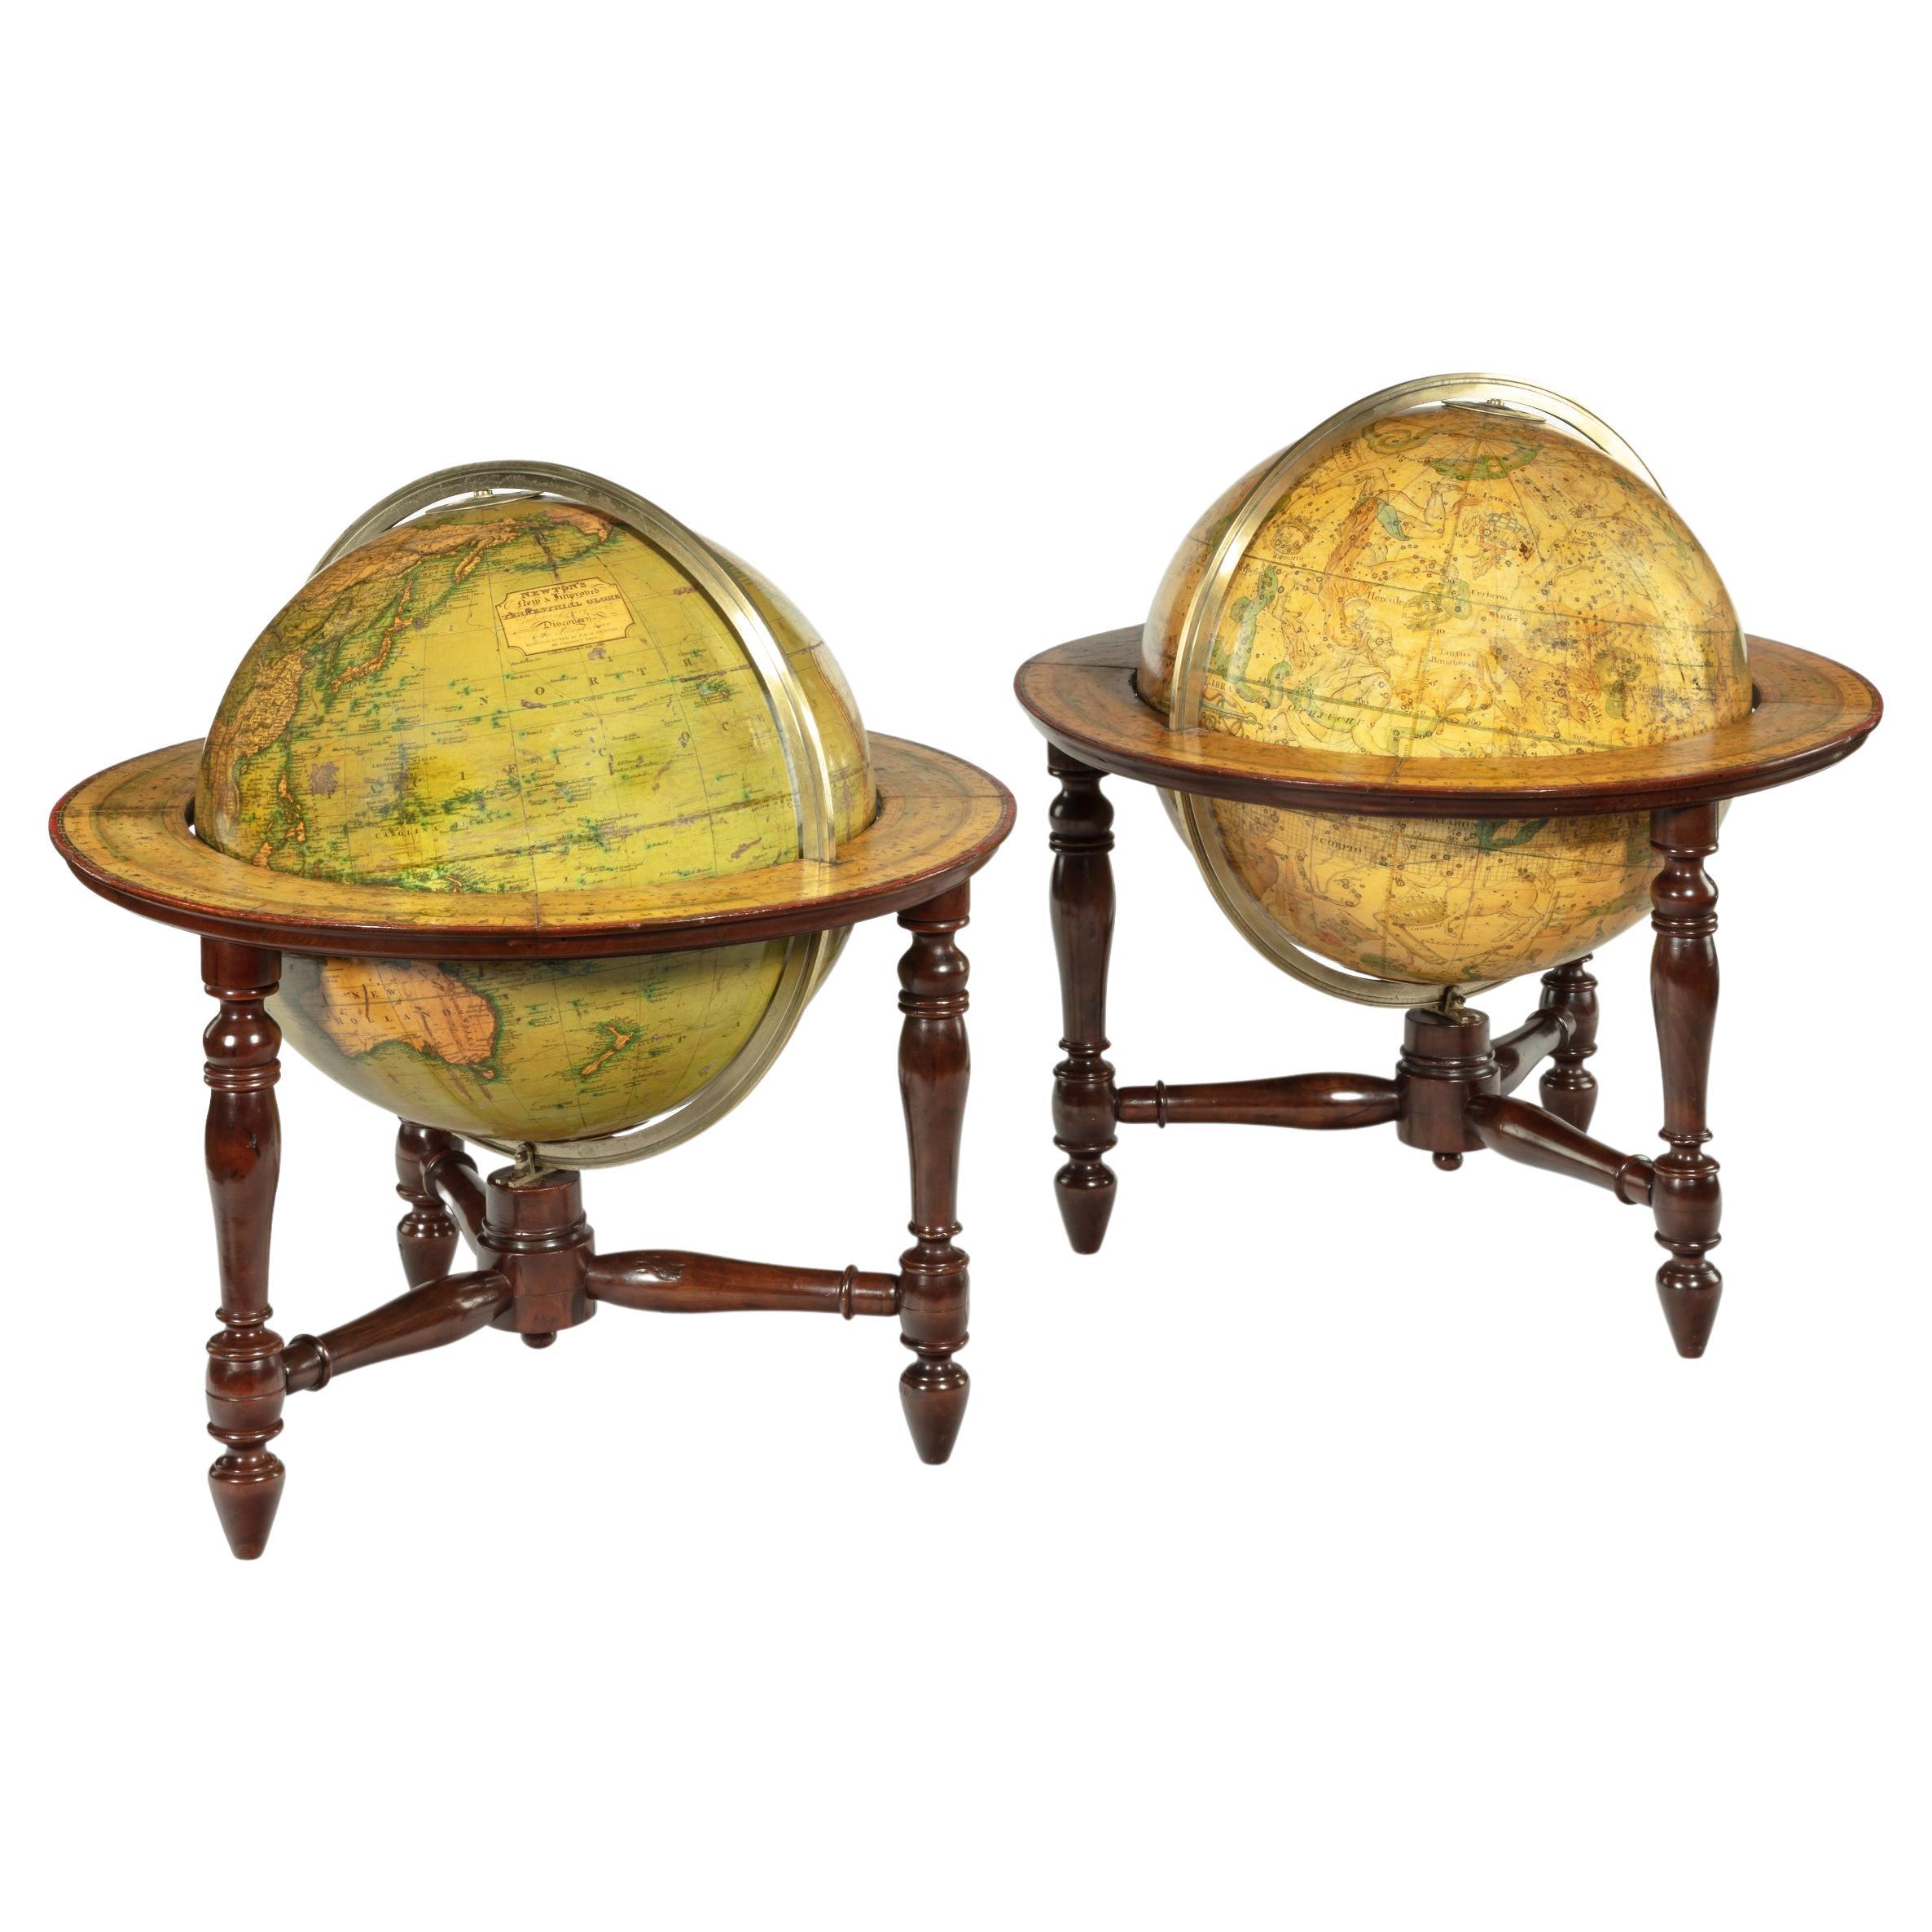 Pair of Table Globes by J & W Newton, Dated 1820